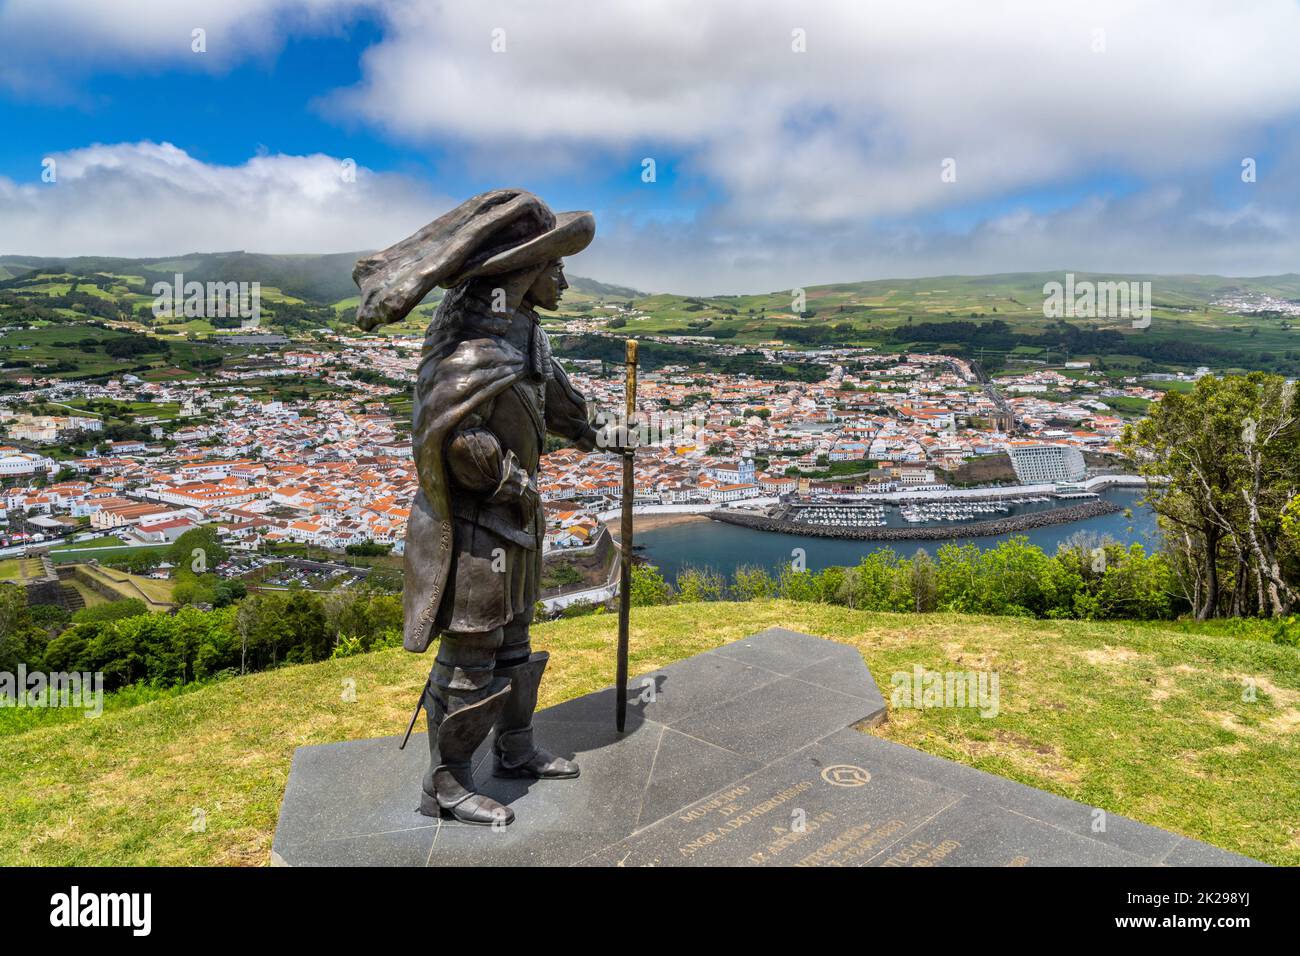 Statue of Afonso VI Second King of Portugal on Monte Brasil with a view of the historic city centre, public beach called the Praia de Angra do Heroismo below, in Angra do Heroismo, Terceira Island, Azores, Portugal. Stock Photo